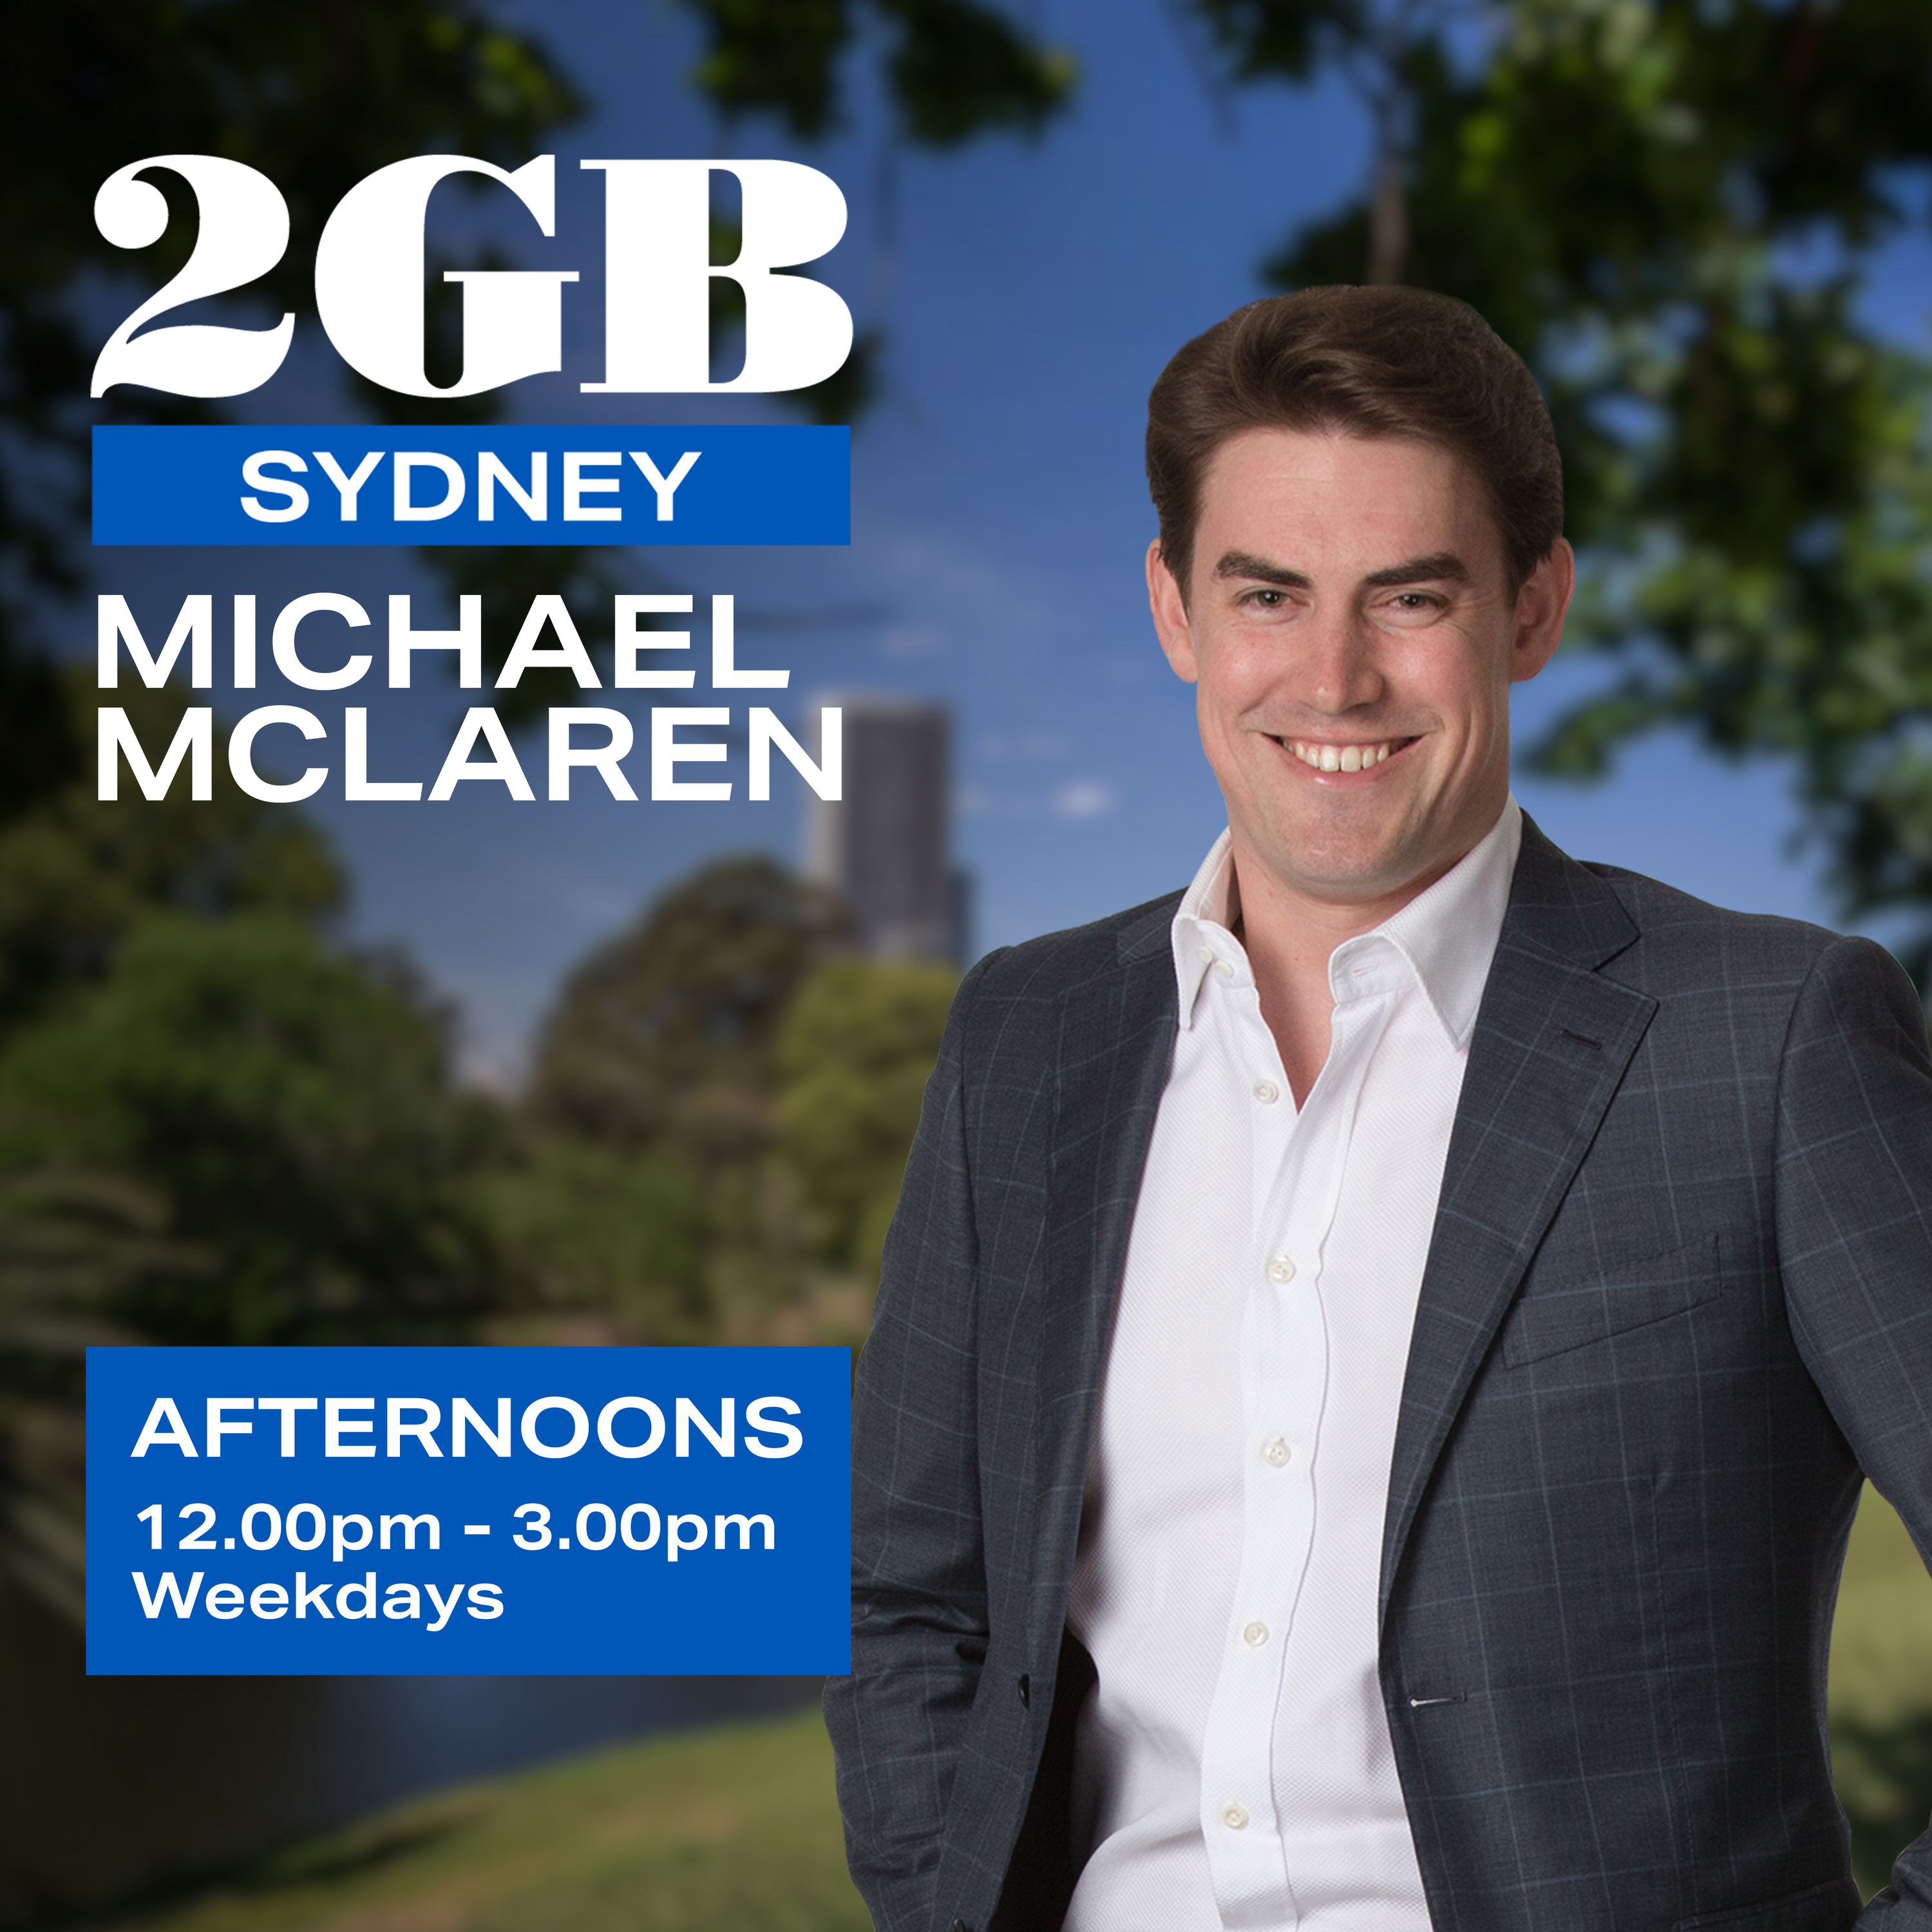 Afternoons with Michael McLaren - Tuesday, 28th May